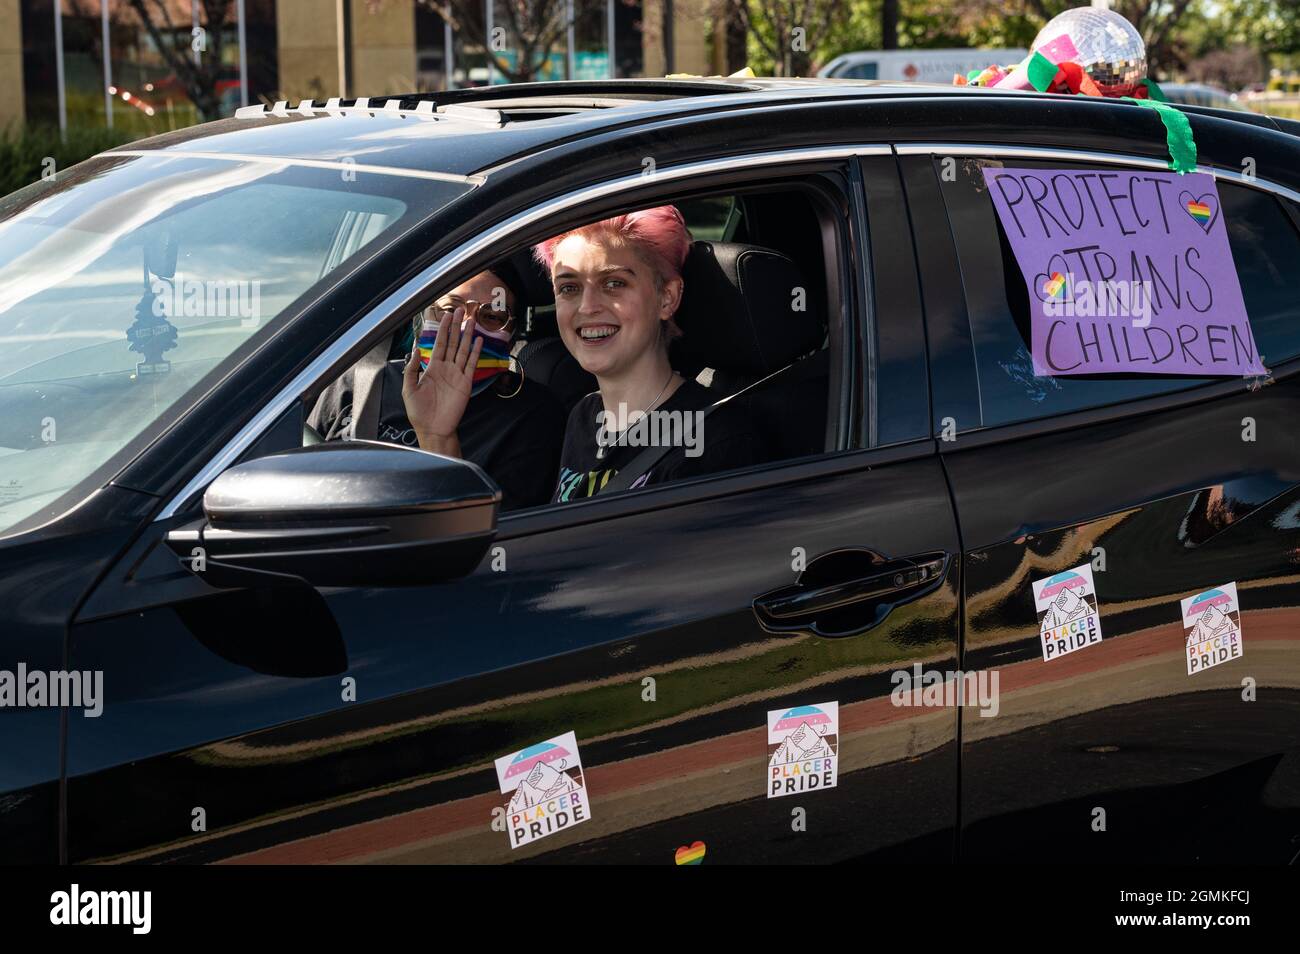 ROSEVILLE, CA, U.S.A. - SEPT. 19, 2021: A young person with pink hair smiles and a person in a rainbow mask waves while driving a 'Protect Trans Child Stock Photo